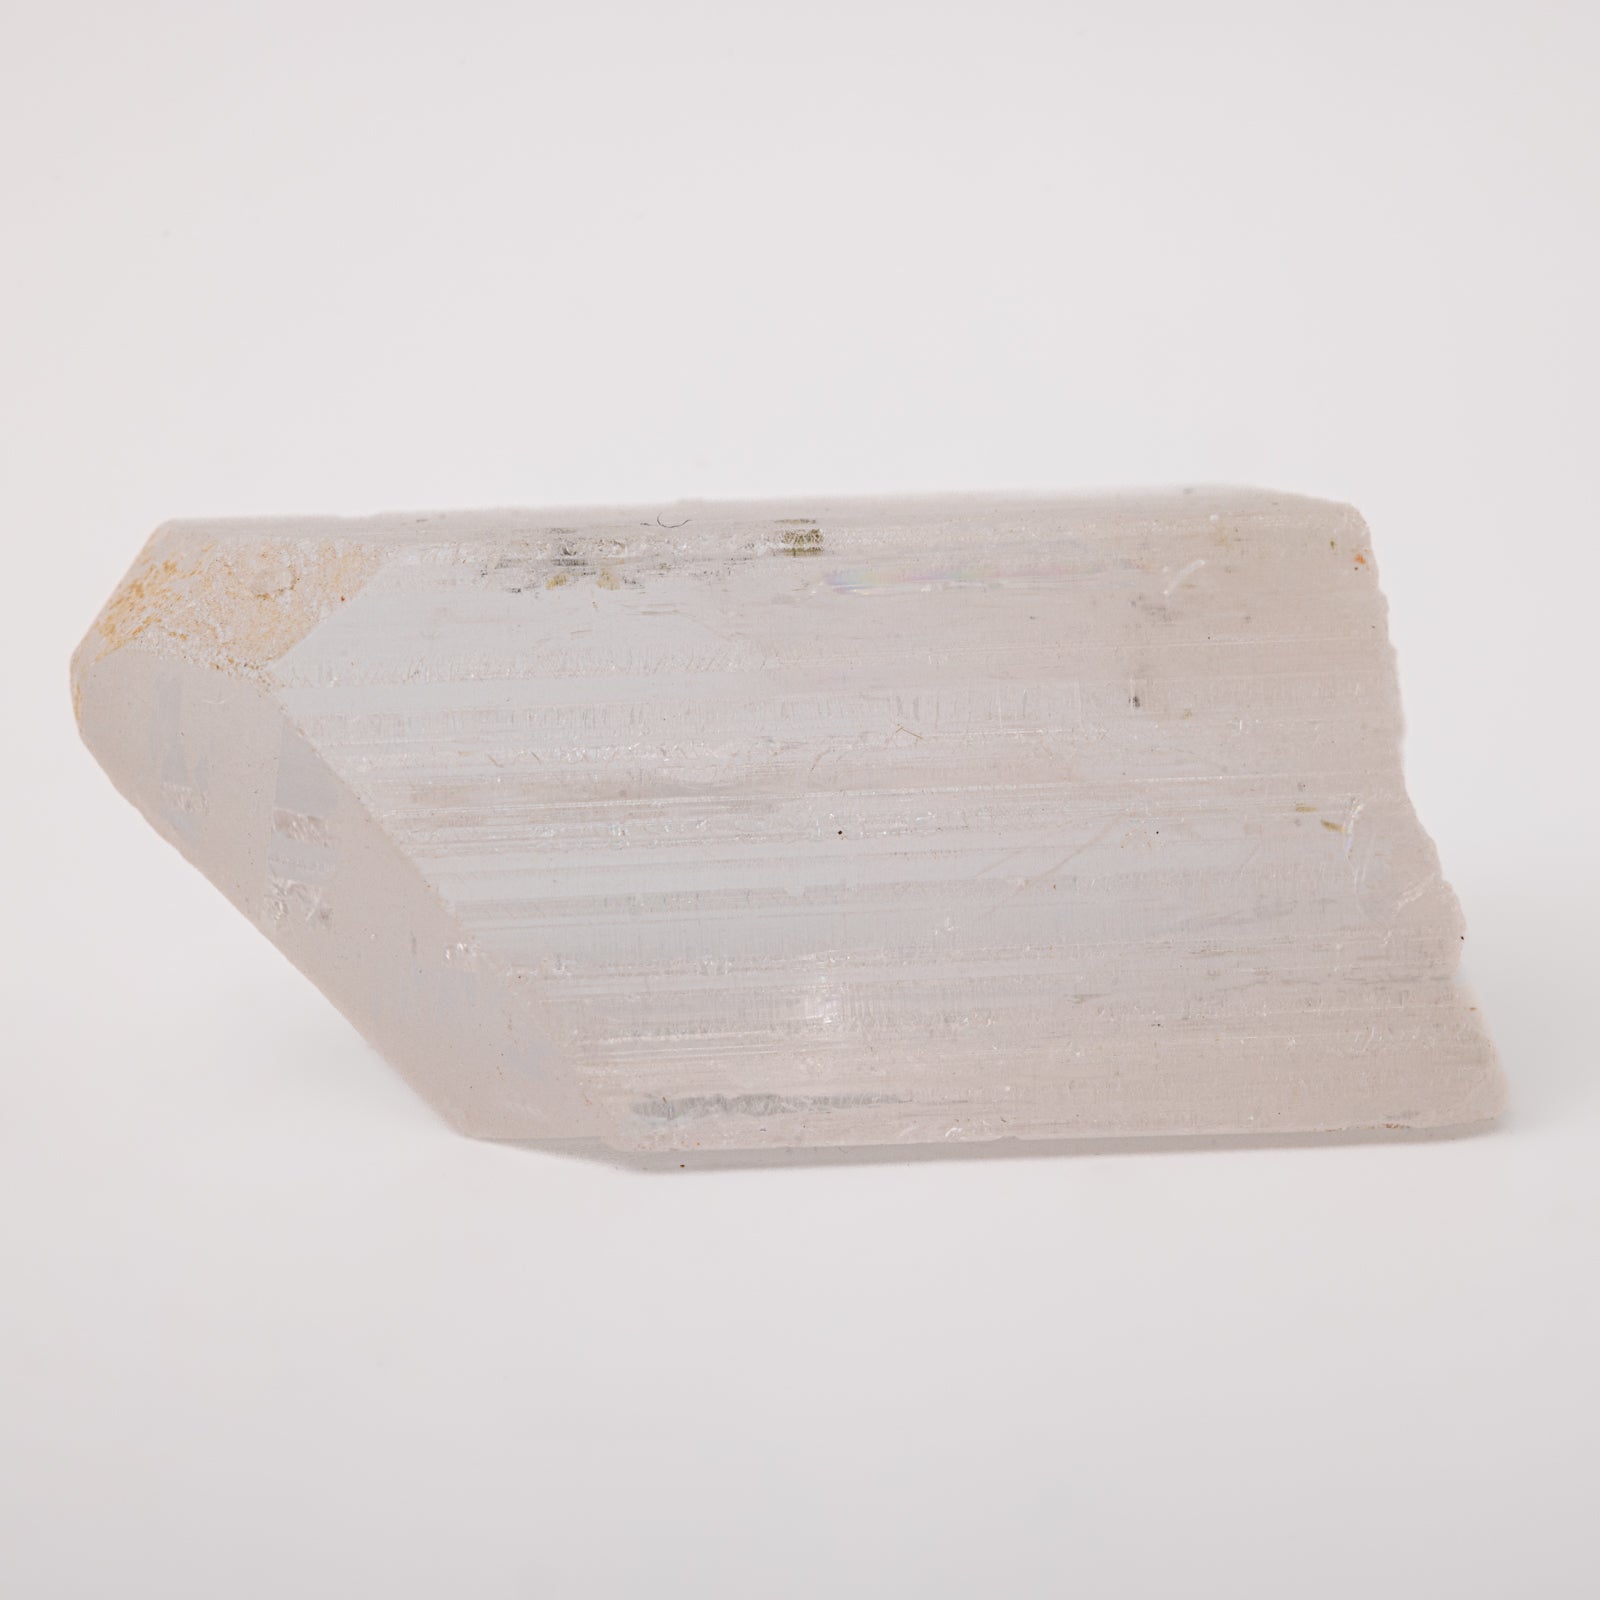  Danburite crystals, approximately 1.25" - 1" in size, handpicked for you by Juniper Stones.